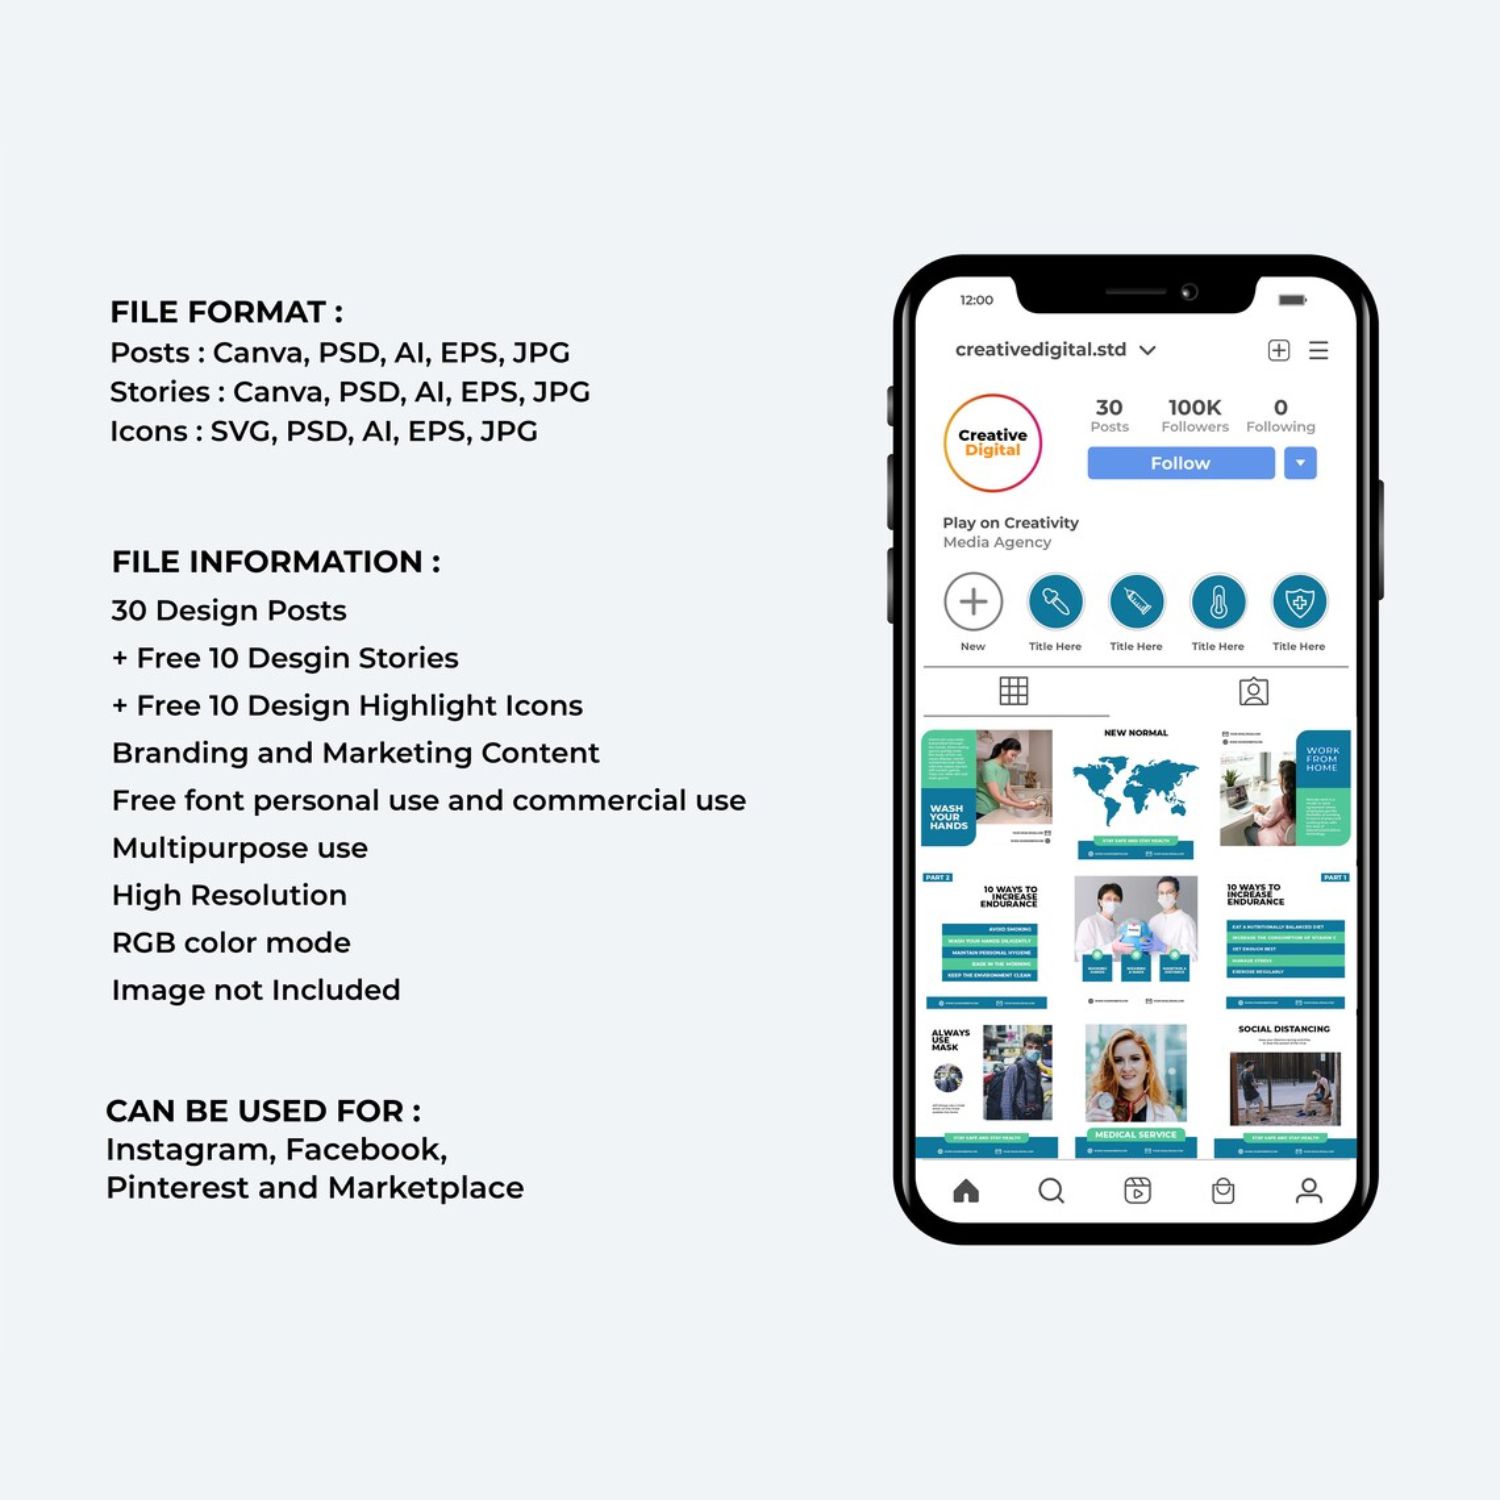 Medical Instagram Marketing Story And Icon Templates Description.